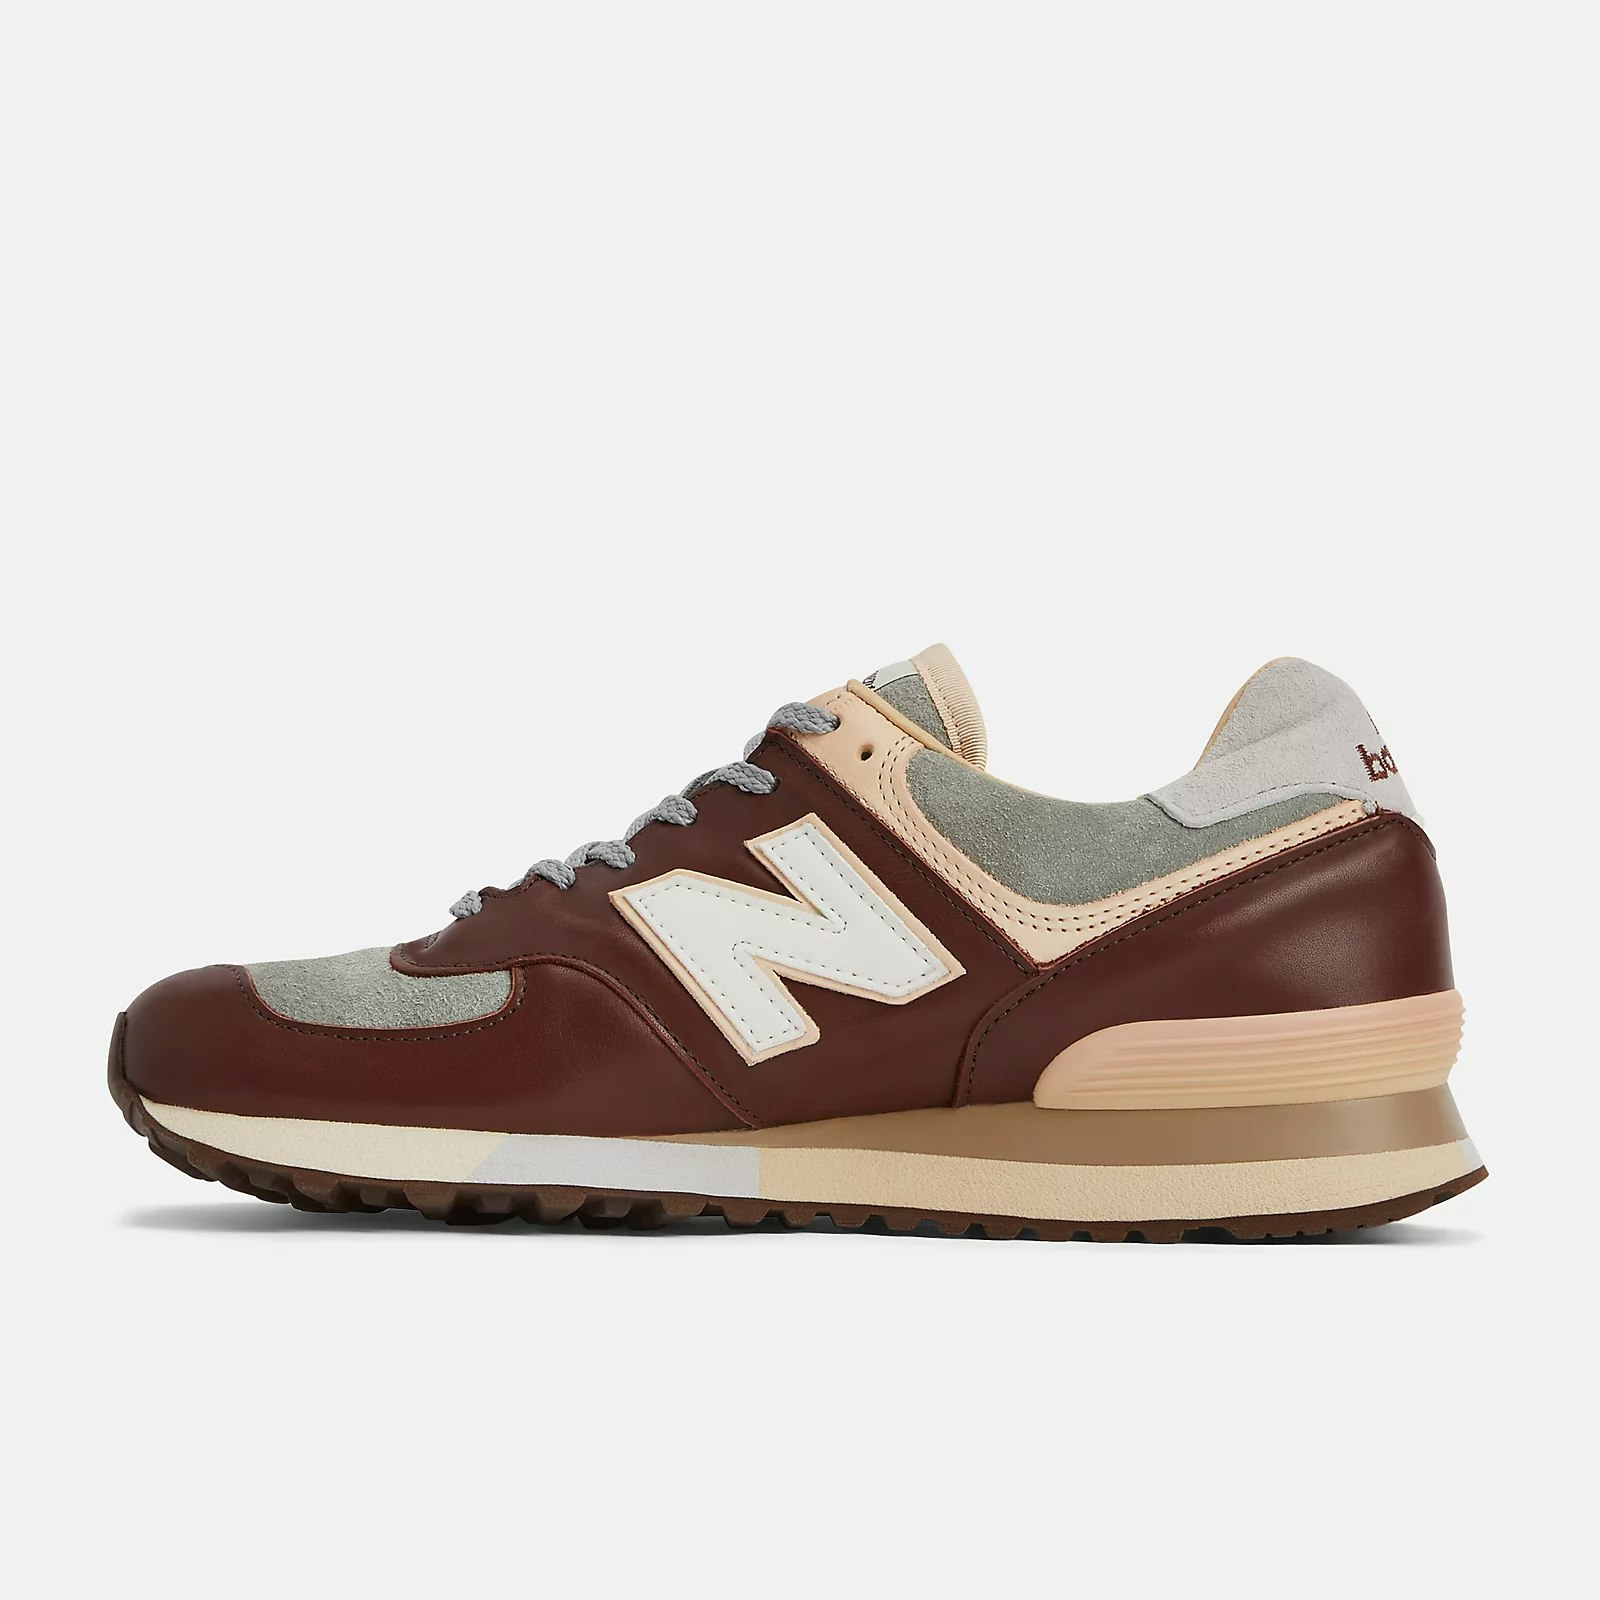 The Apartment x New Balance 576 "Made in UK" (Bitter Chocolate)